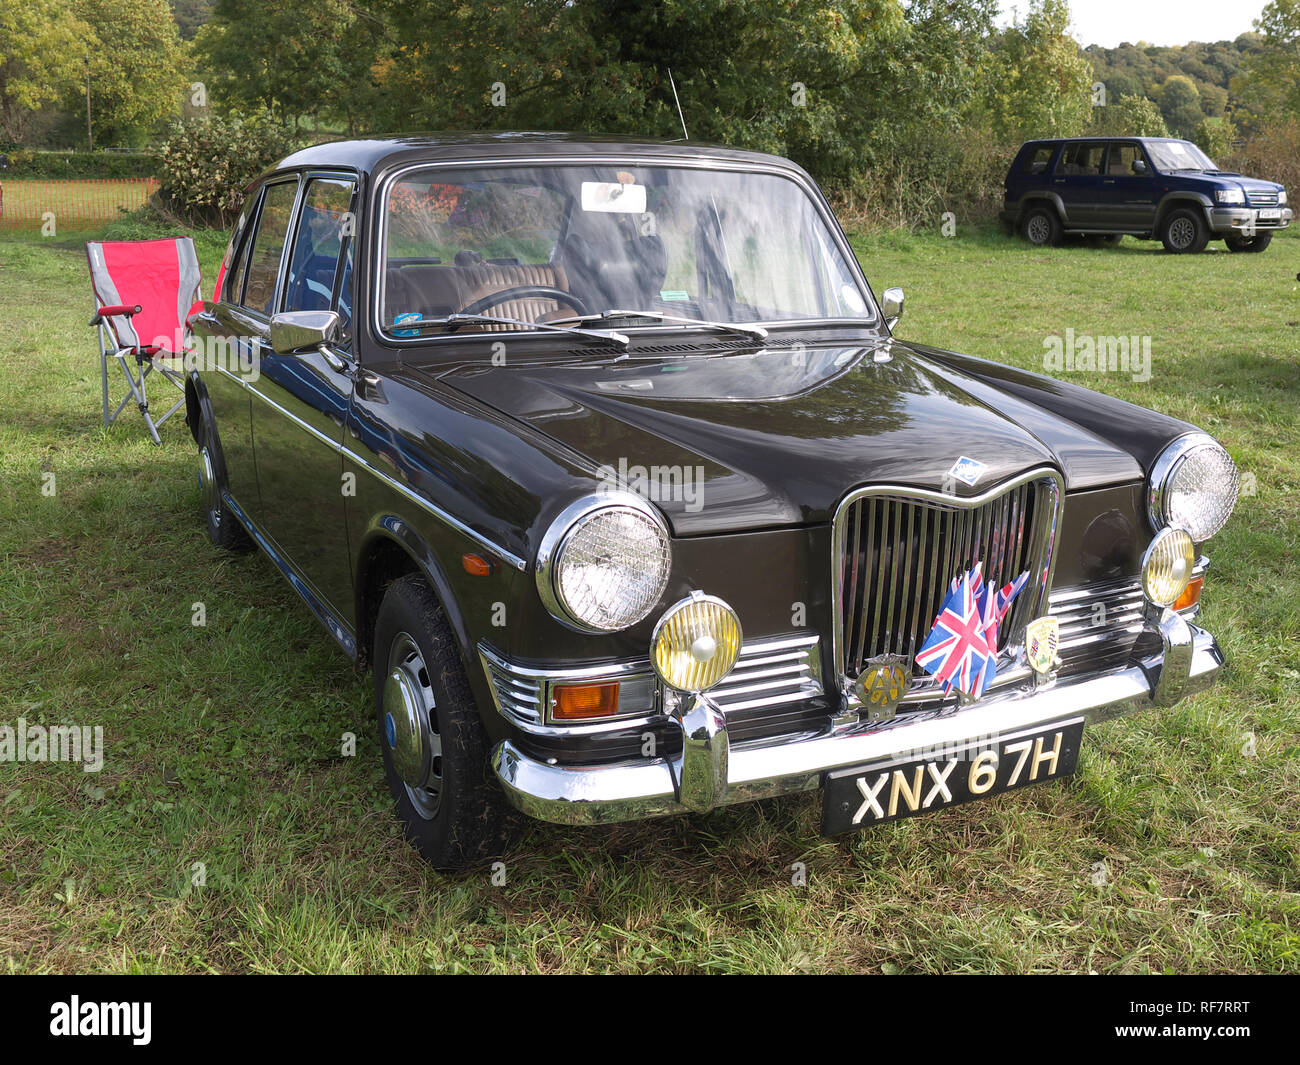 Classic 1969/70 Riley at Ashover festival of lights Stock Photo